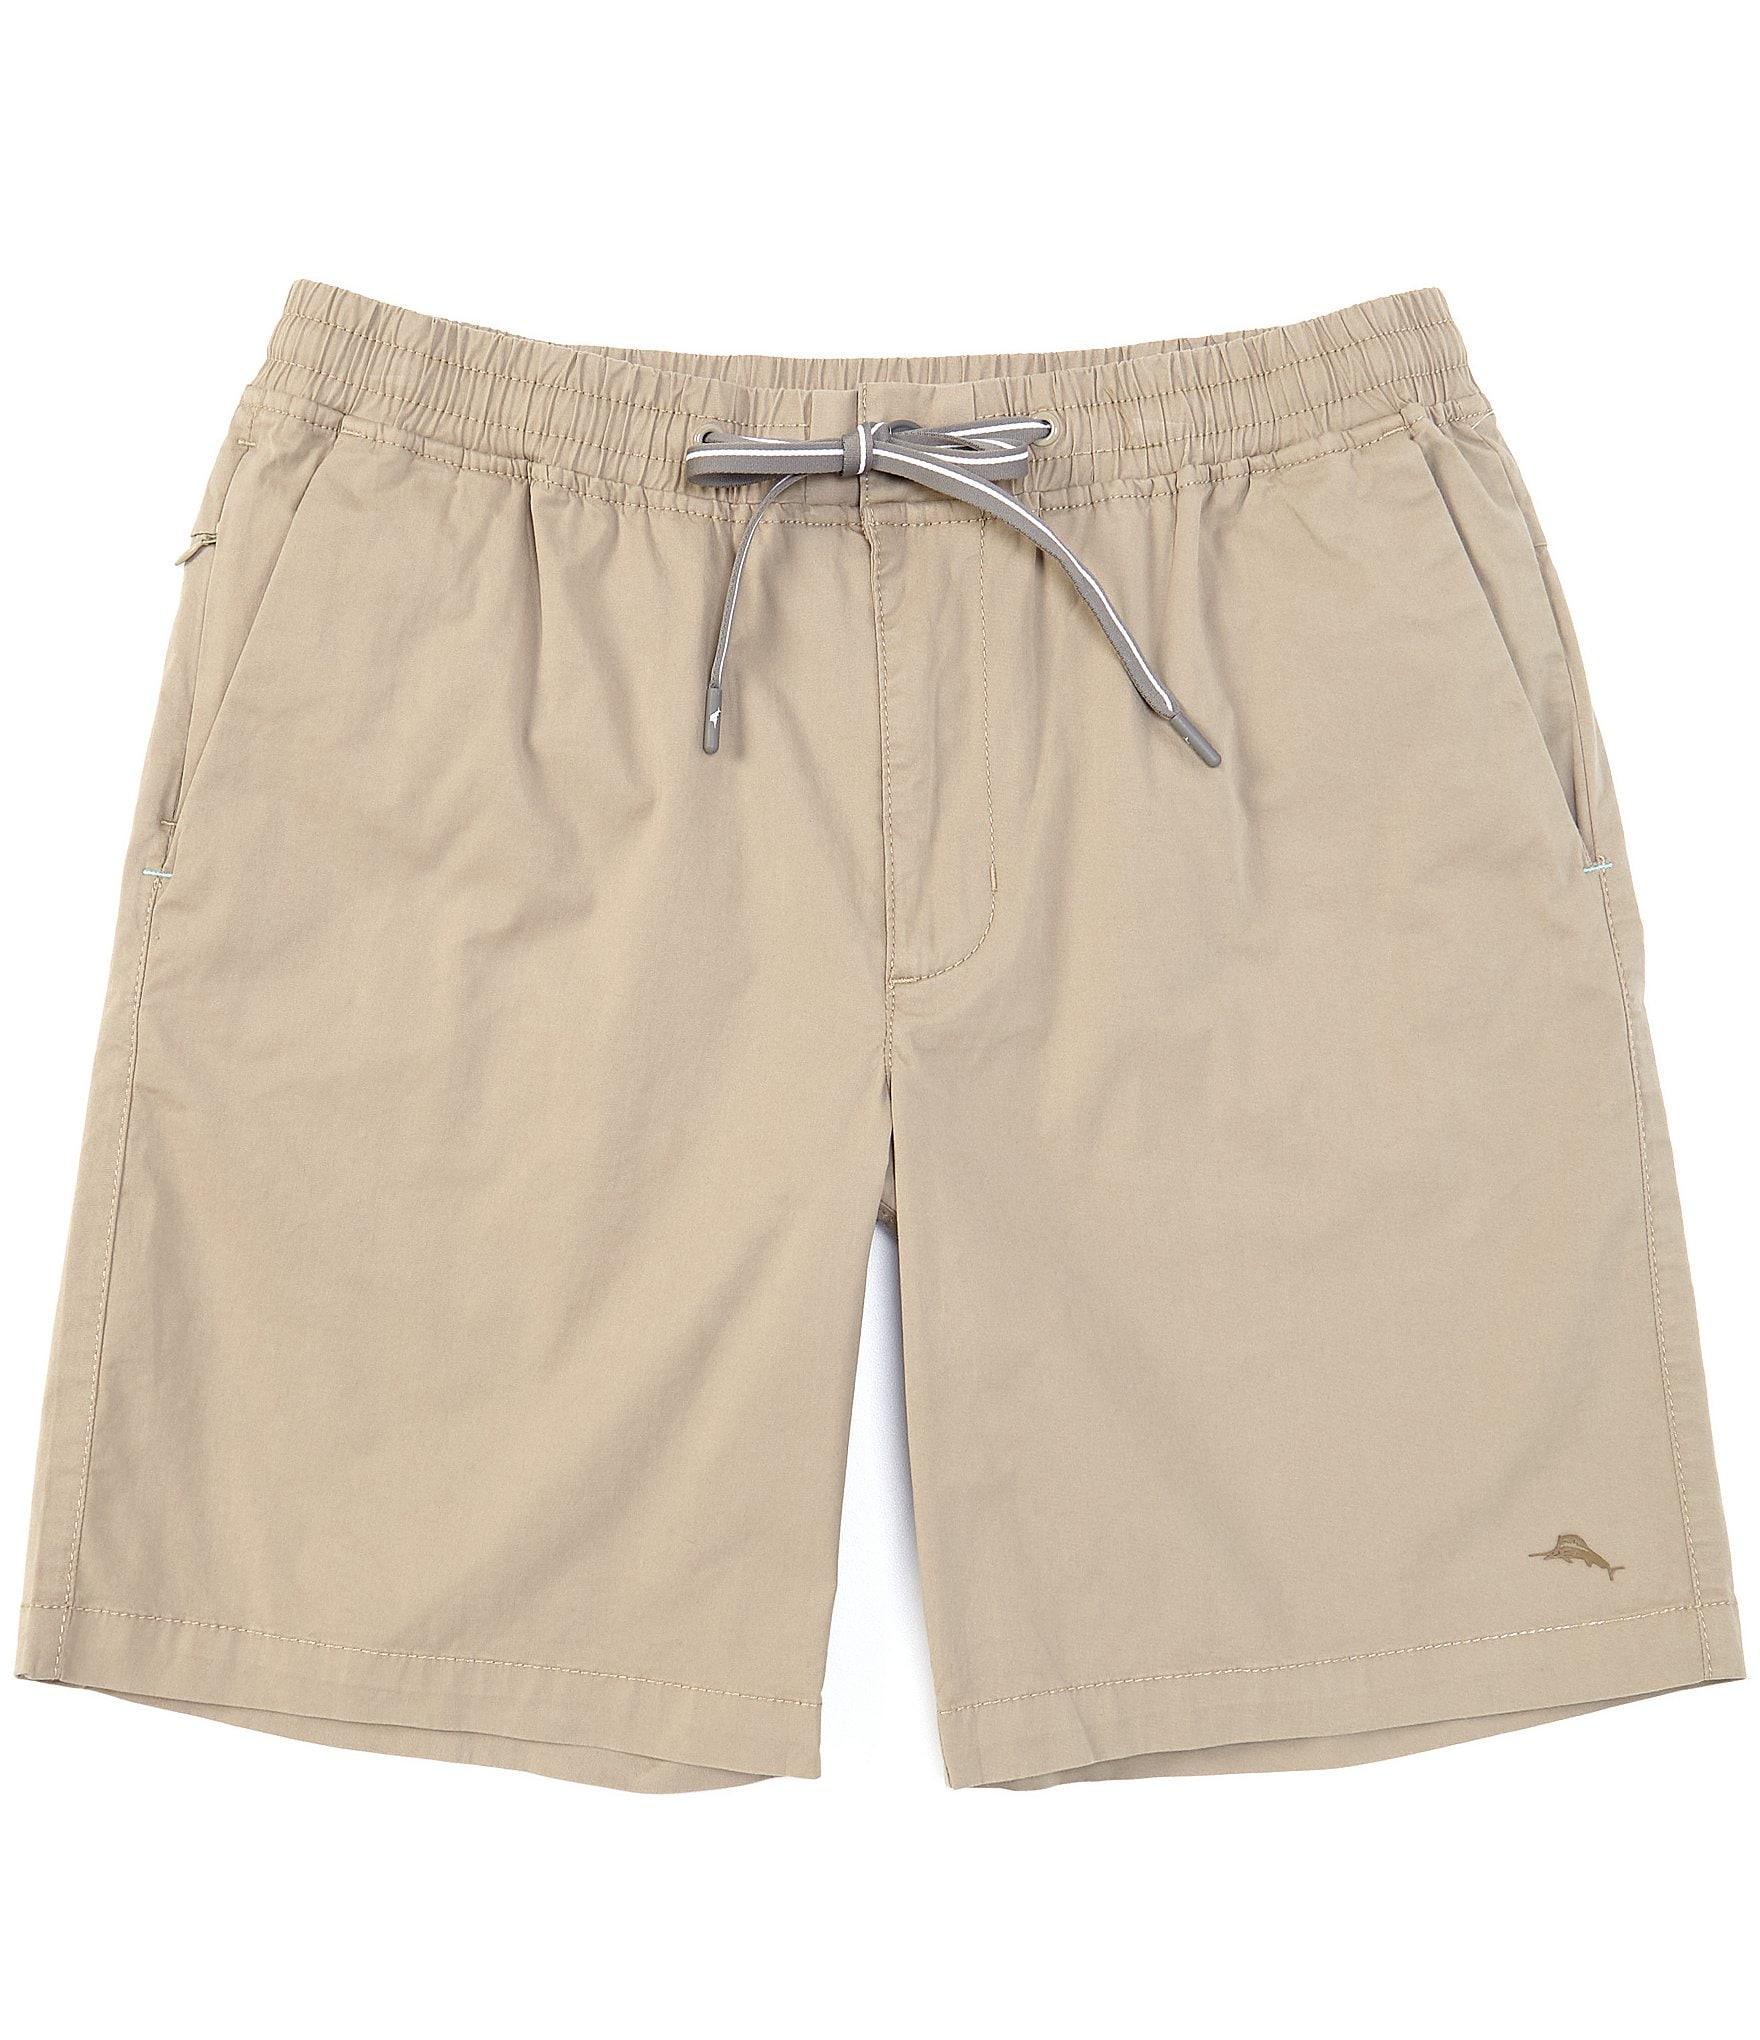 Tommy Bahama Cargo Shorts Sale | vlr.eng.br